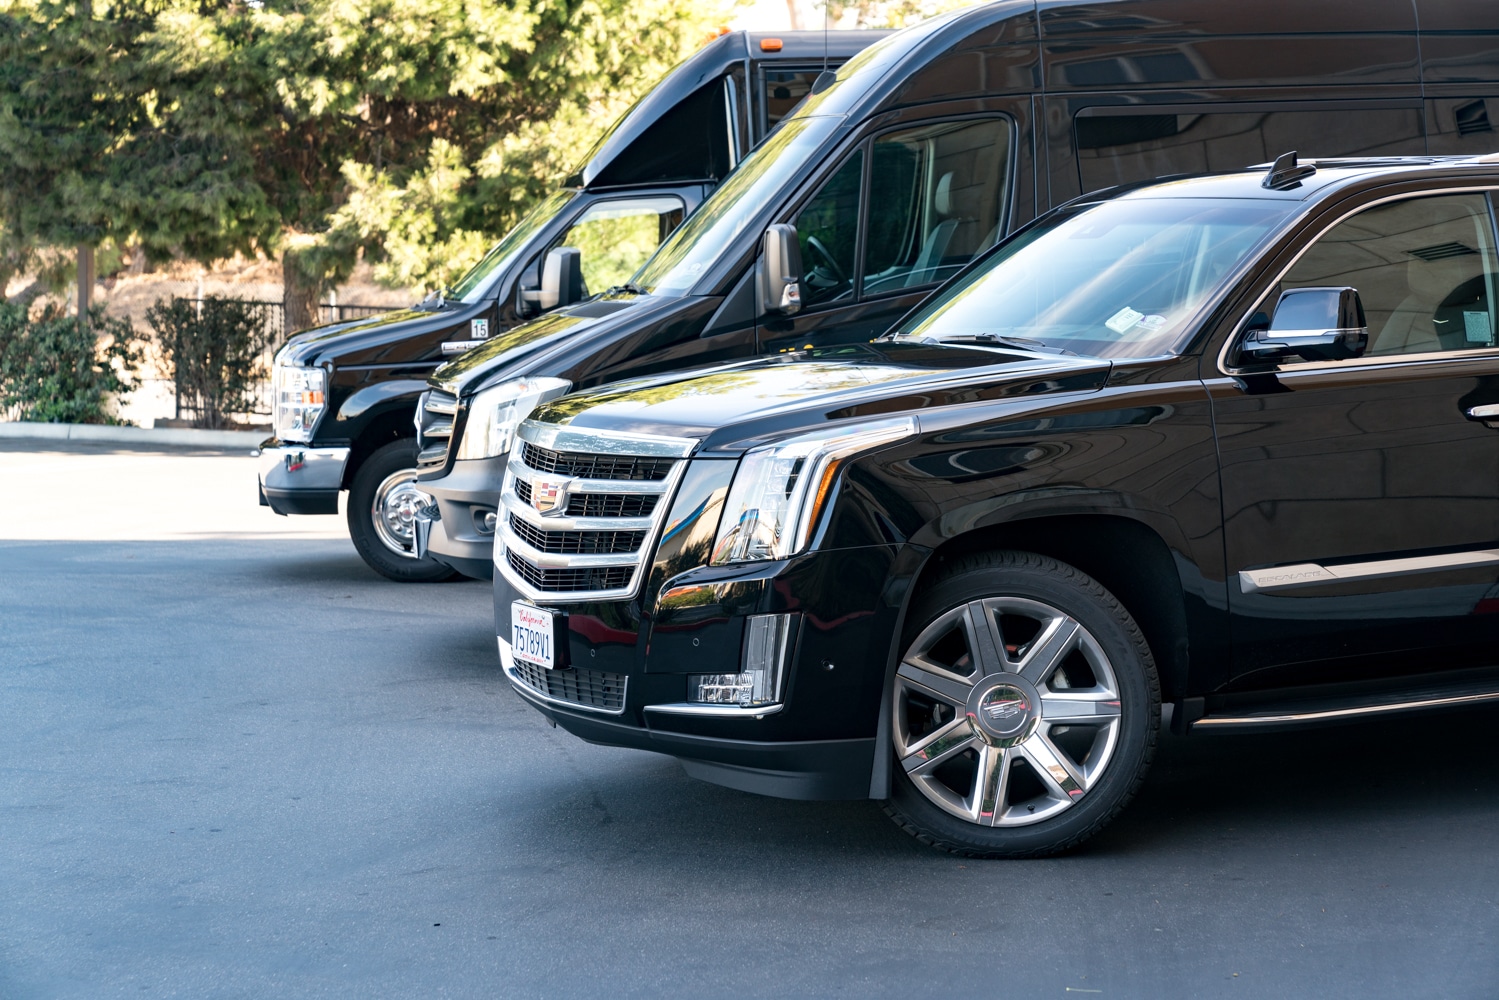 airport transfer service ILS chauffeur Limo luxury fleets